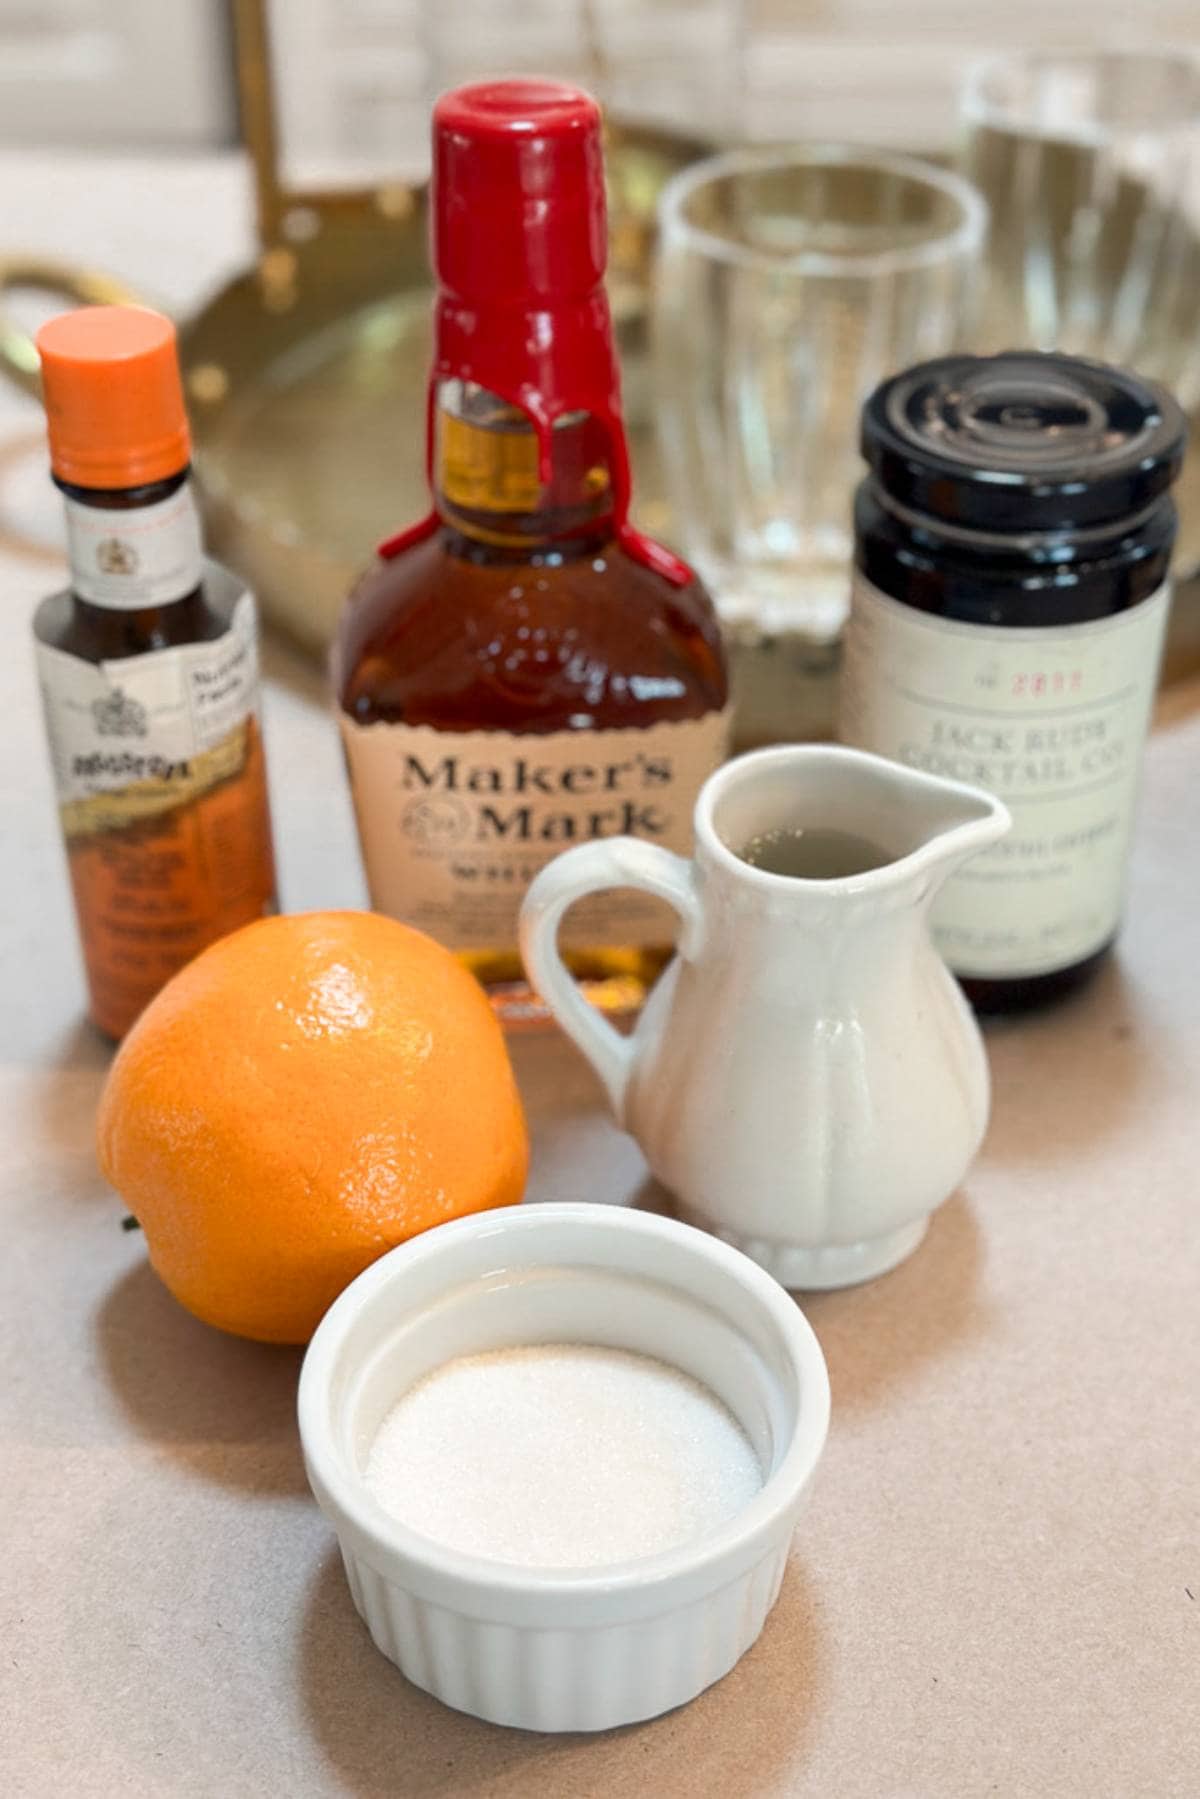 Ingredients to make a smoked Old Fashioned cocktail.